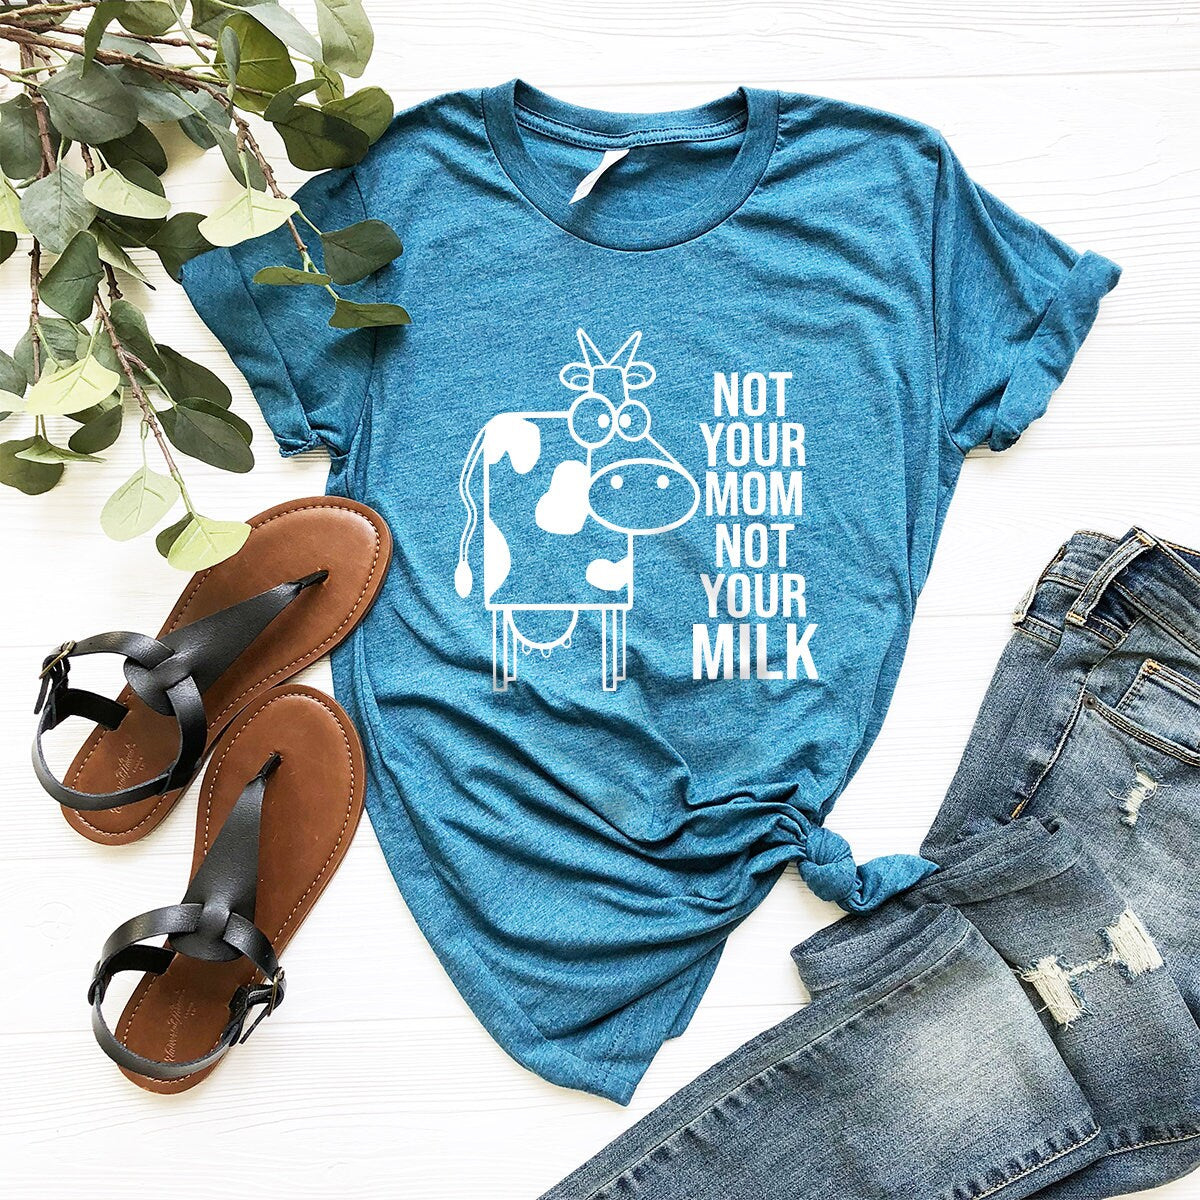 Not Your Mom Not Your Milk T-Shirt,Save Animal Shirt, Vegan Shirt, Vegetarian Shirt, Animal Lover Tee,Gift For Vegan, Animal Rights Tee - Fastdeliverytees.com